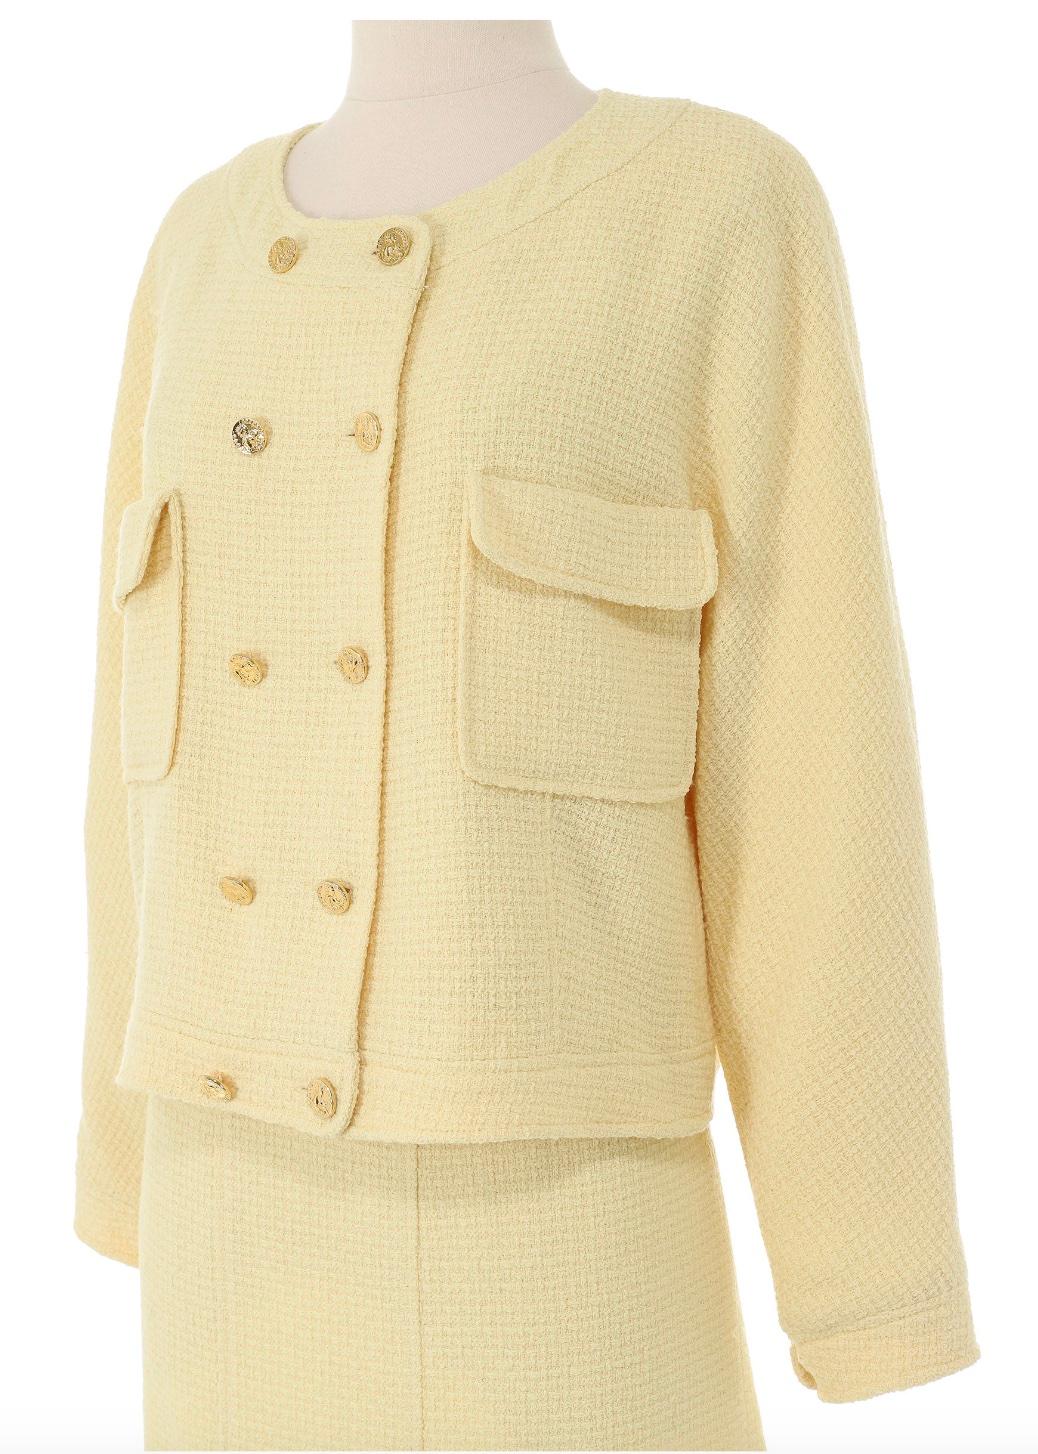 Chanel Yellow Tweed Skirt Suit with Gold Buttons In Excellent Condition For Sale In New York, NY